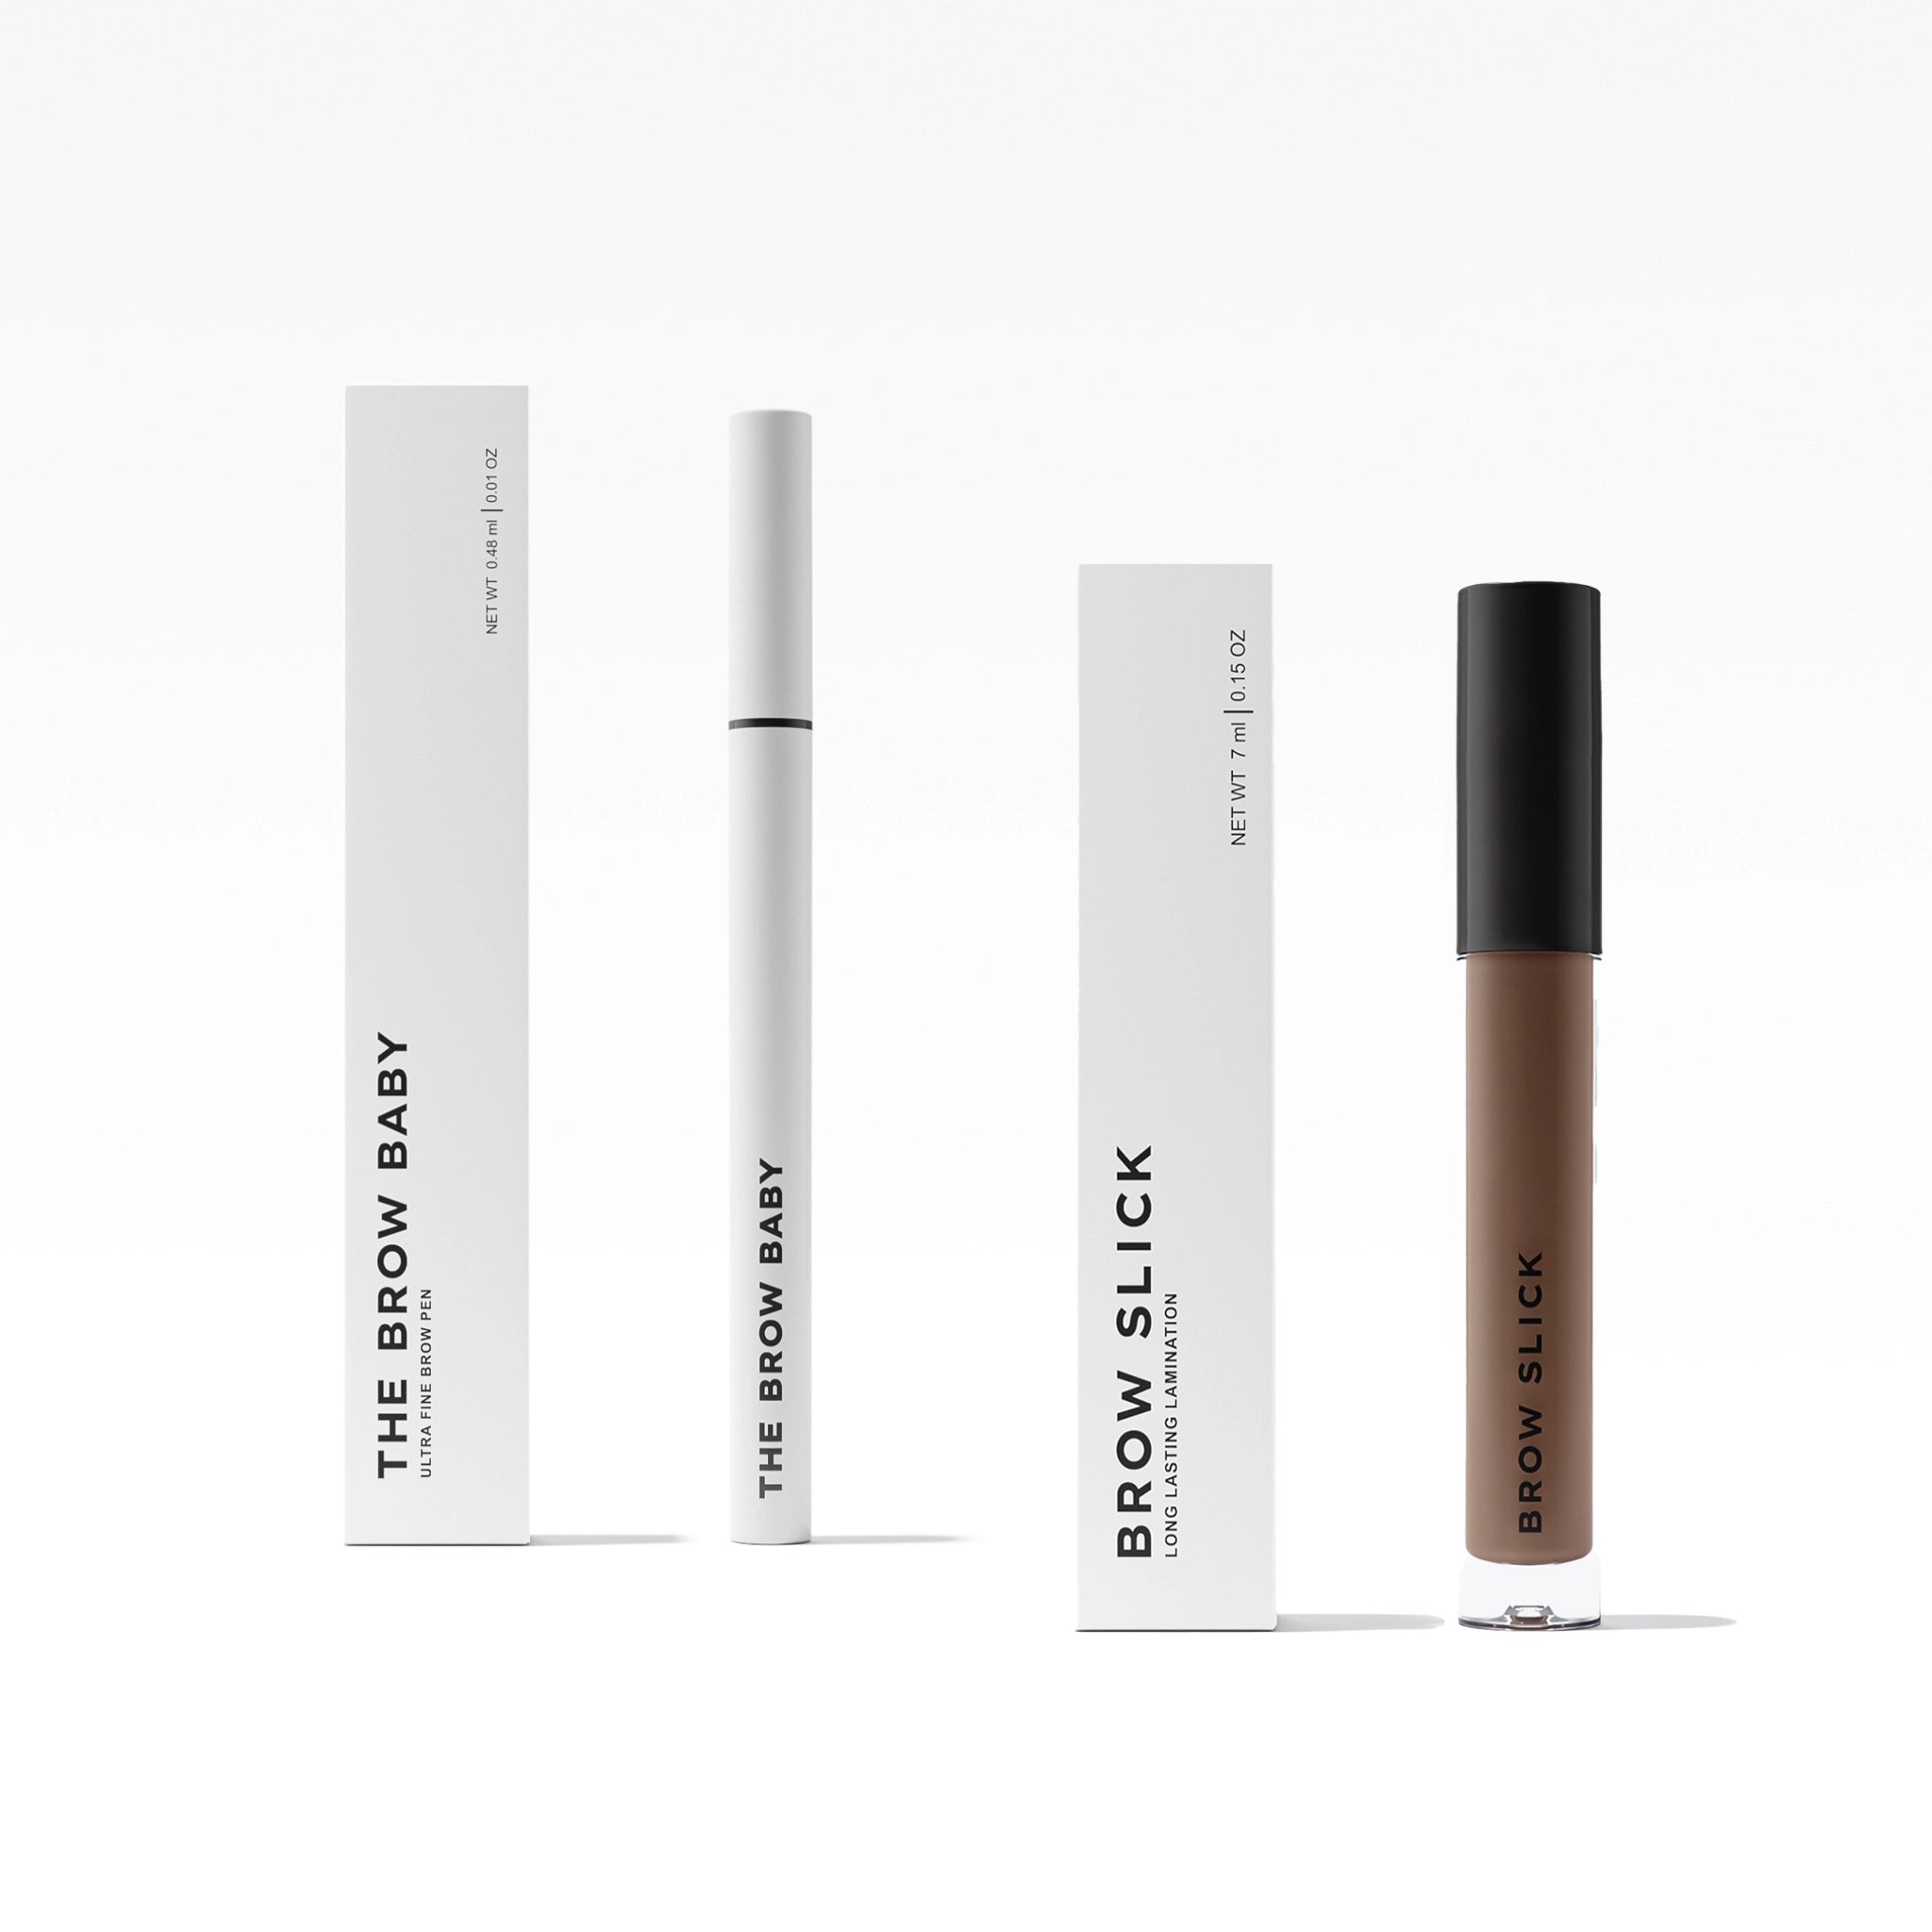 The Brow Baby and Brow Slick Product Image About